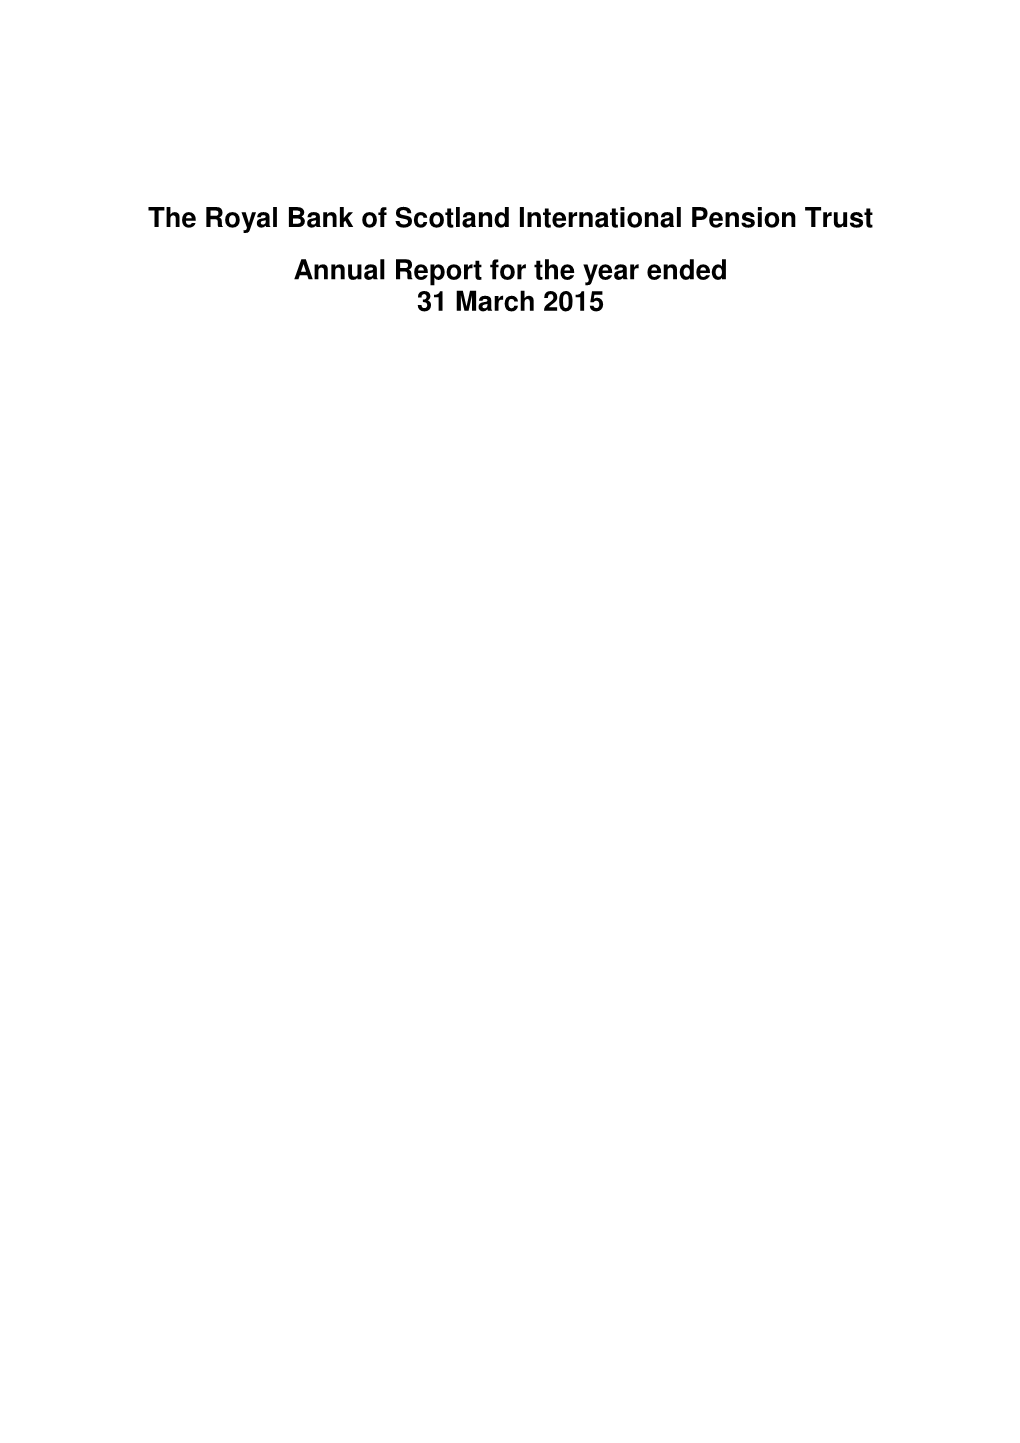 The Royal Bank of Scotland International Pension Trust Annual Report for the Year Ended 31 March 2015